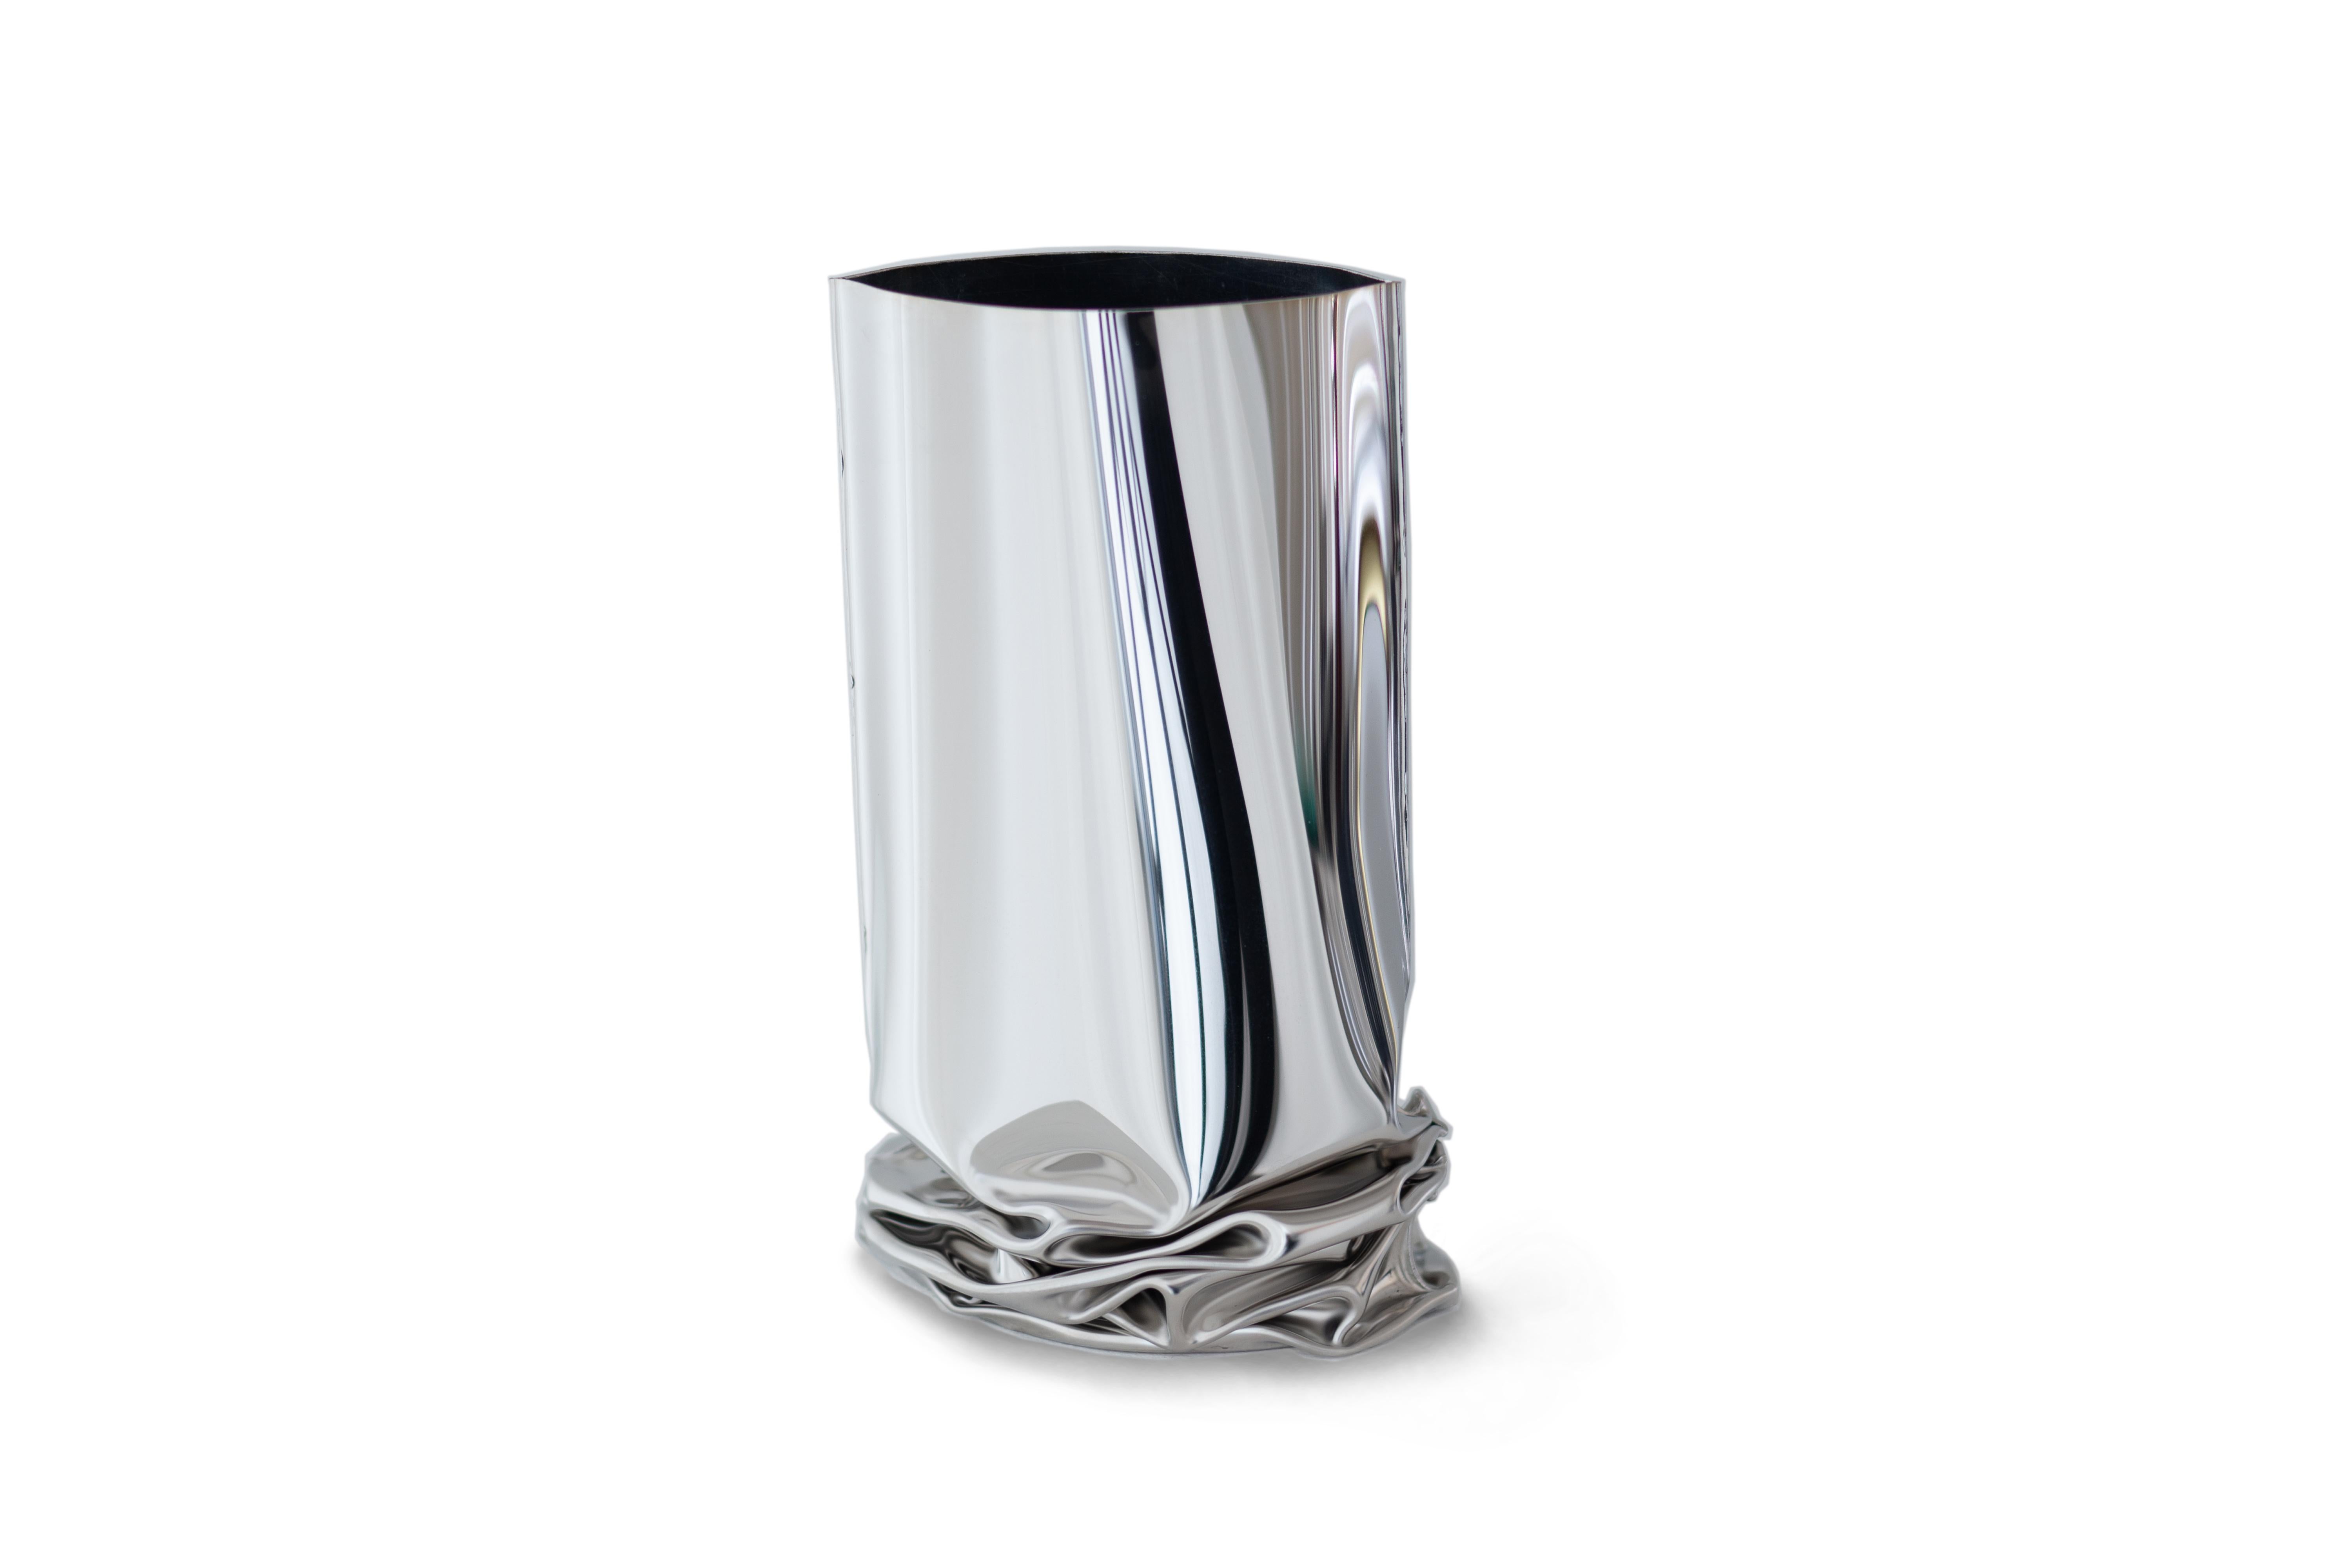 Crash vase 2 by Zieta
Dimensions: H 25 x W 16 x D 18 cm.
Materials: polished stainless steel.

Unobtrusive deformation Crash Vases reflect the “controlled loss of control” technique. The vases embrace the notion of deformation.
Grouped